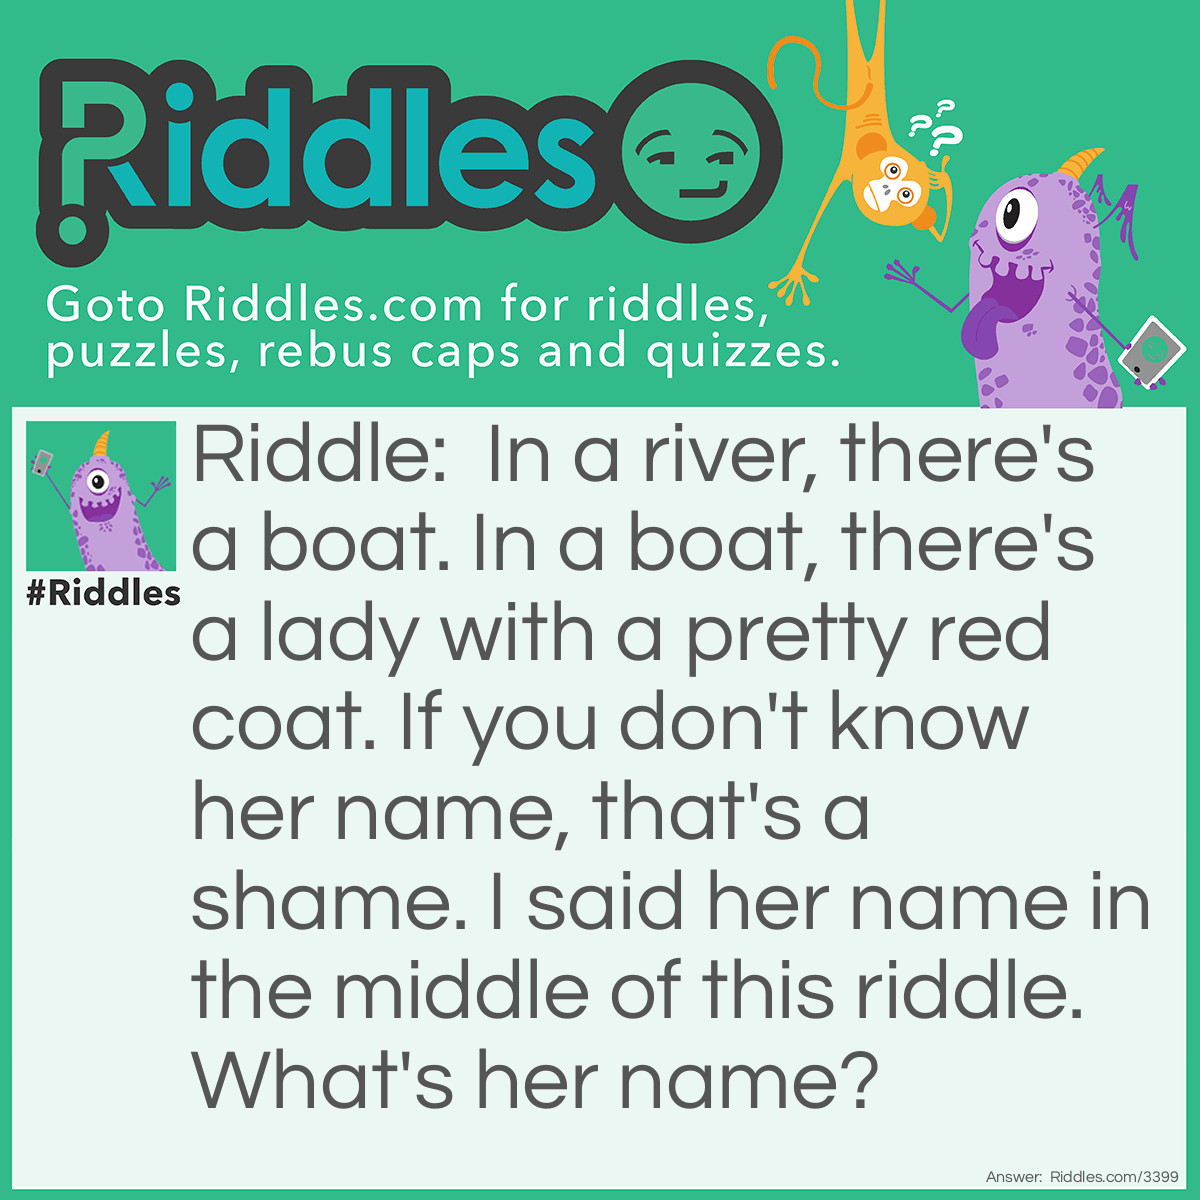 Riddle: In a river, there's a boat. In a boat, there's a lady with a pretty red coat. If you don't know her name, that's a shame. I said her name in the middle of this riddle. What's her name? Answer: Her name is Eve! This riddle is supposed to be read aloud not really written because you can say "if" as "Eve."